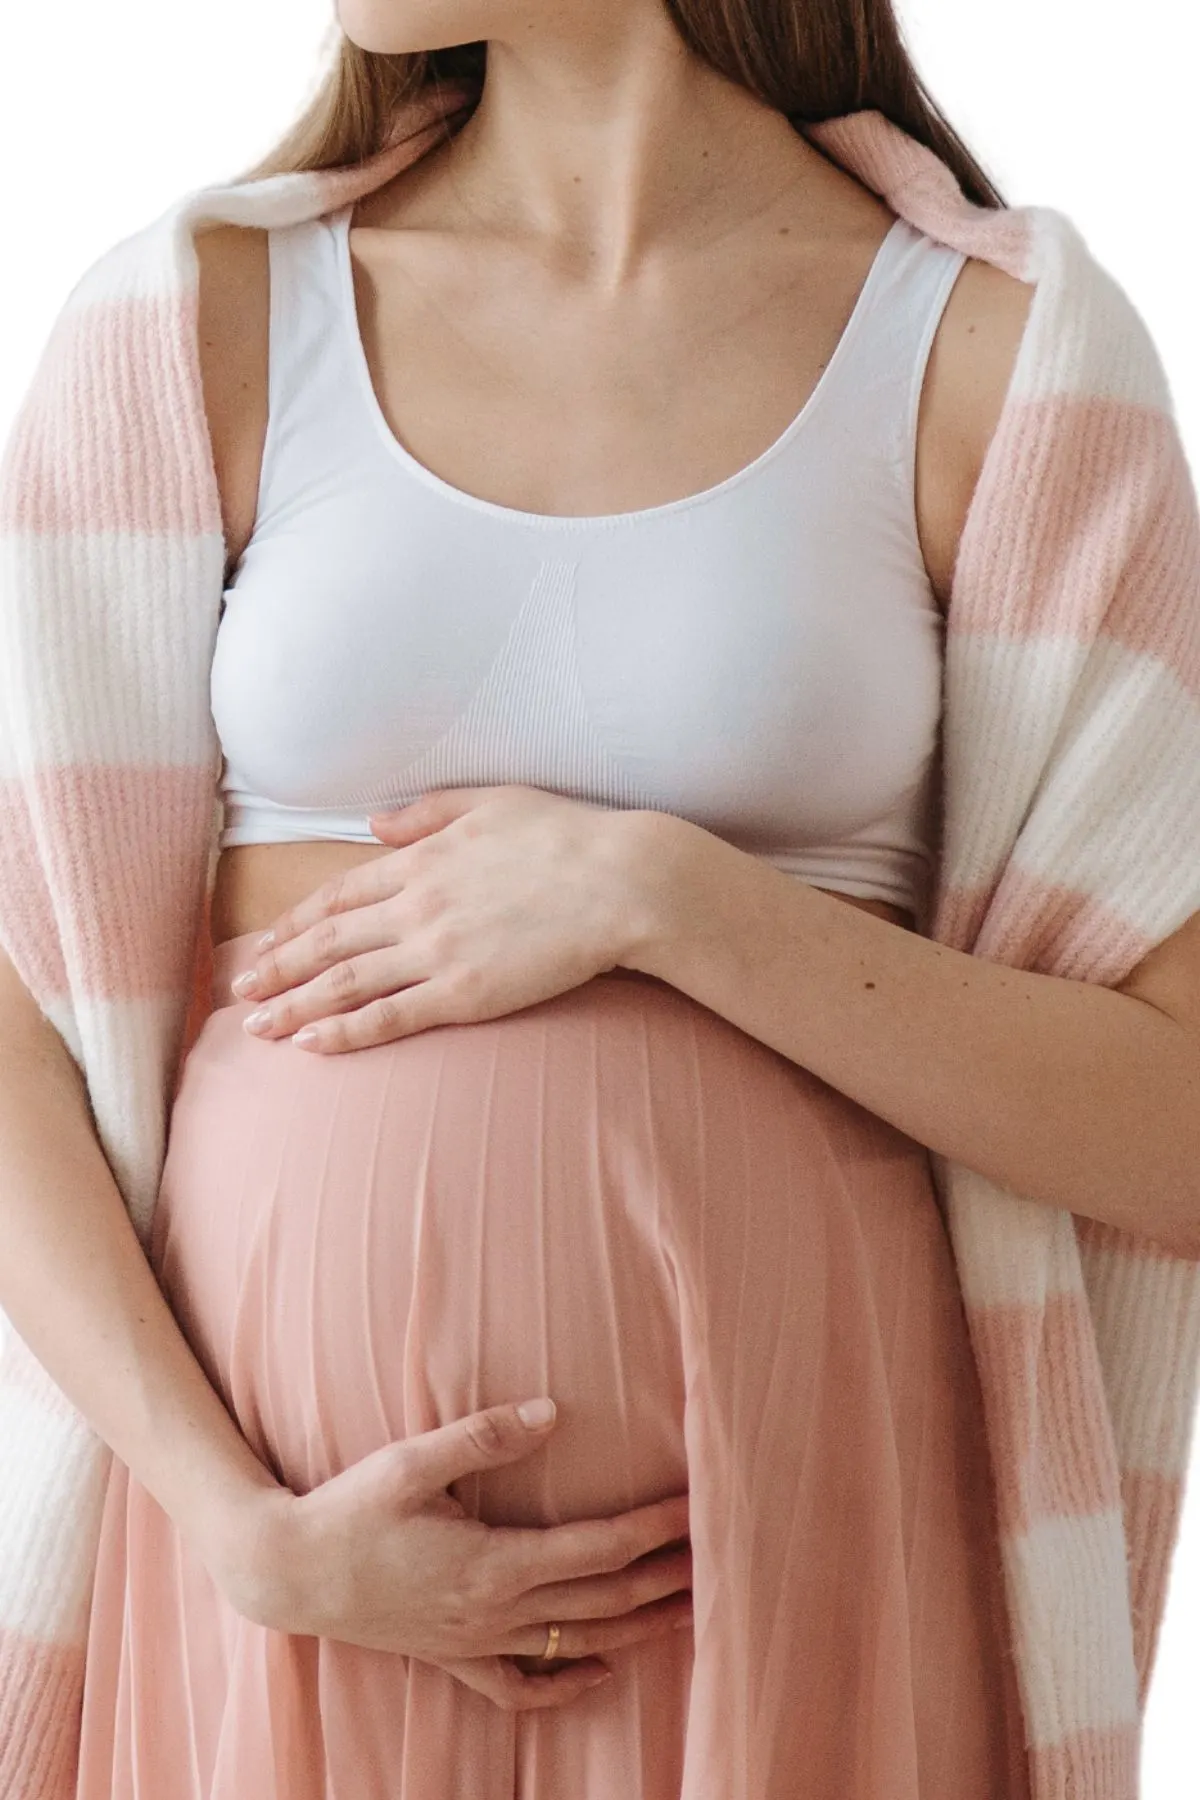 A woman in a white top, pink and white striped cardigan, and pink skirt cradles her pregnant belly.